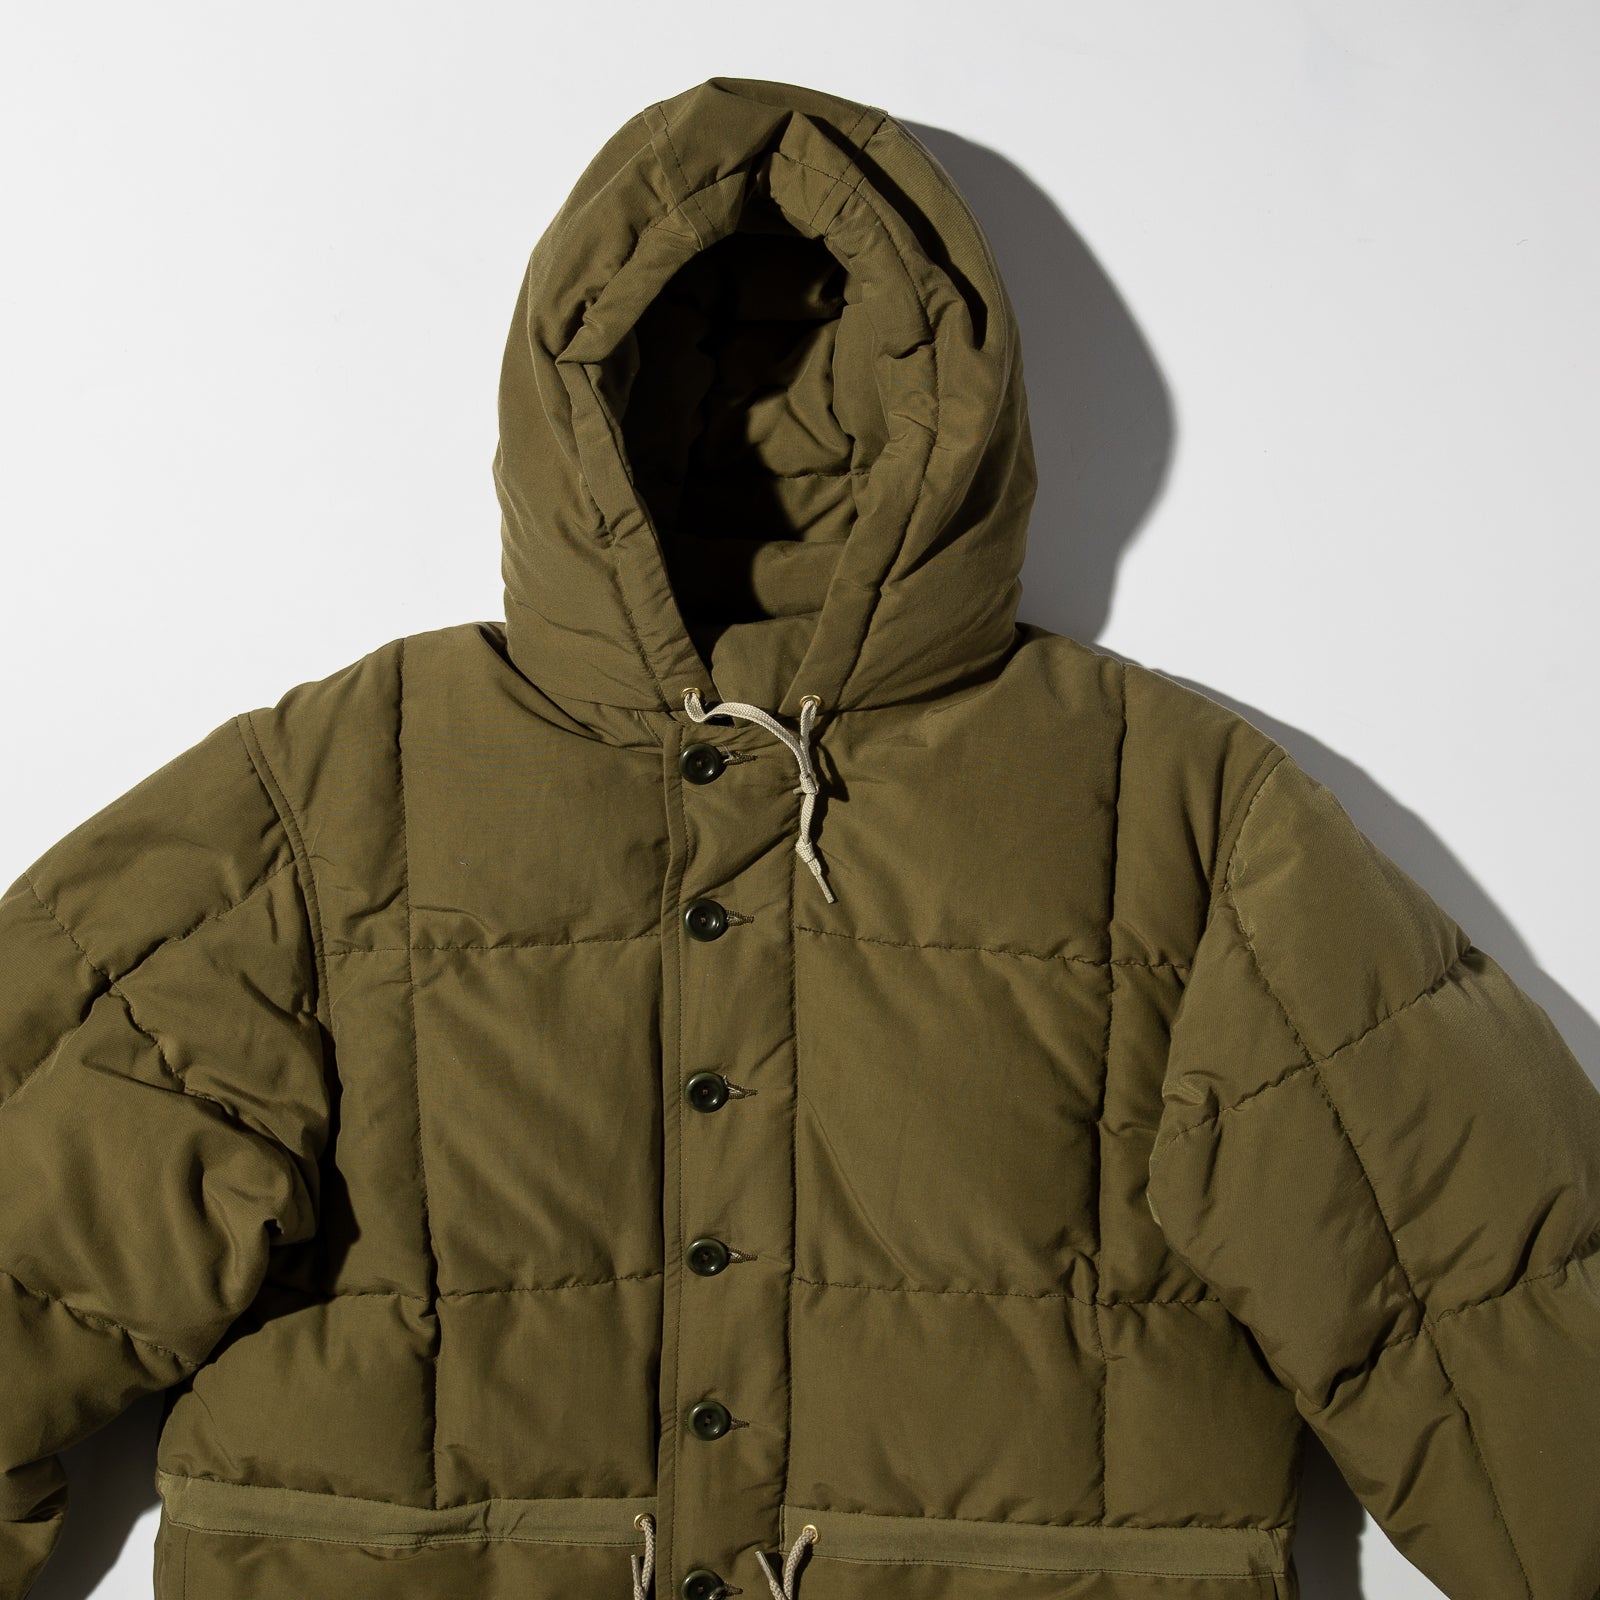 The Real McCoy's Hooded Down Jacket